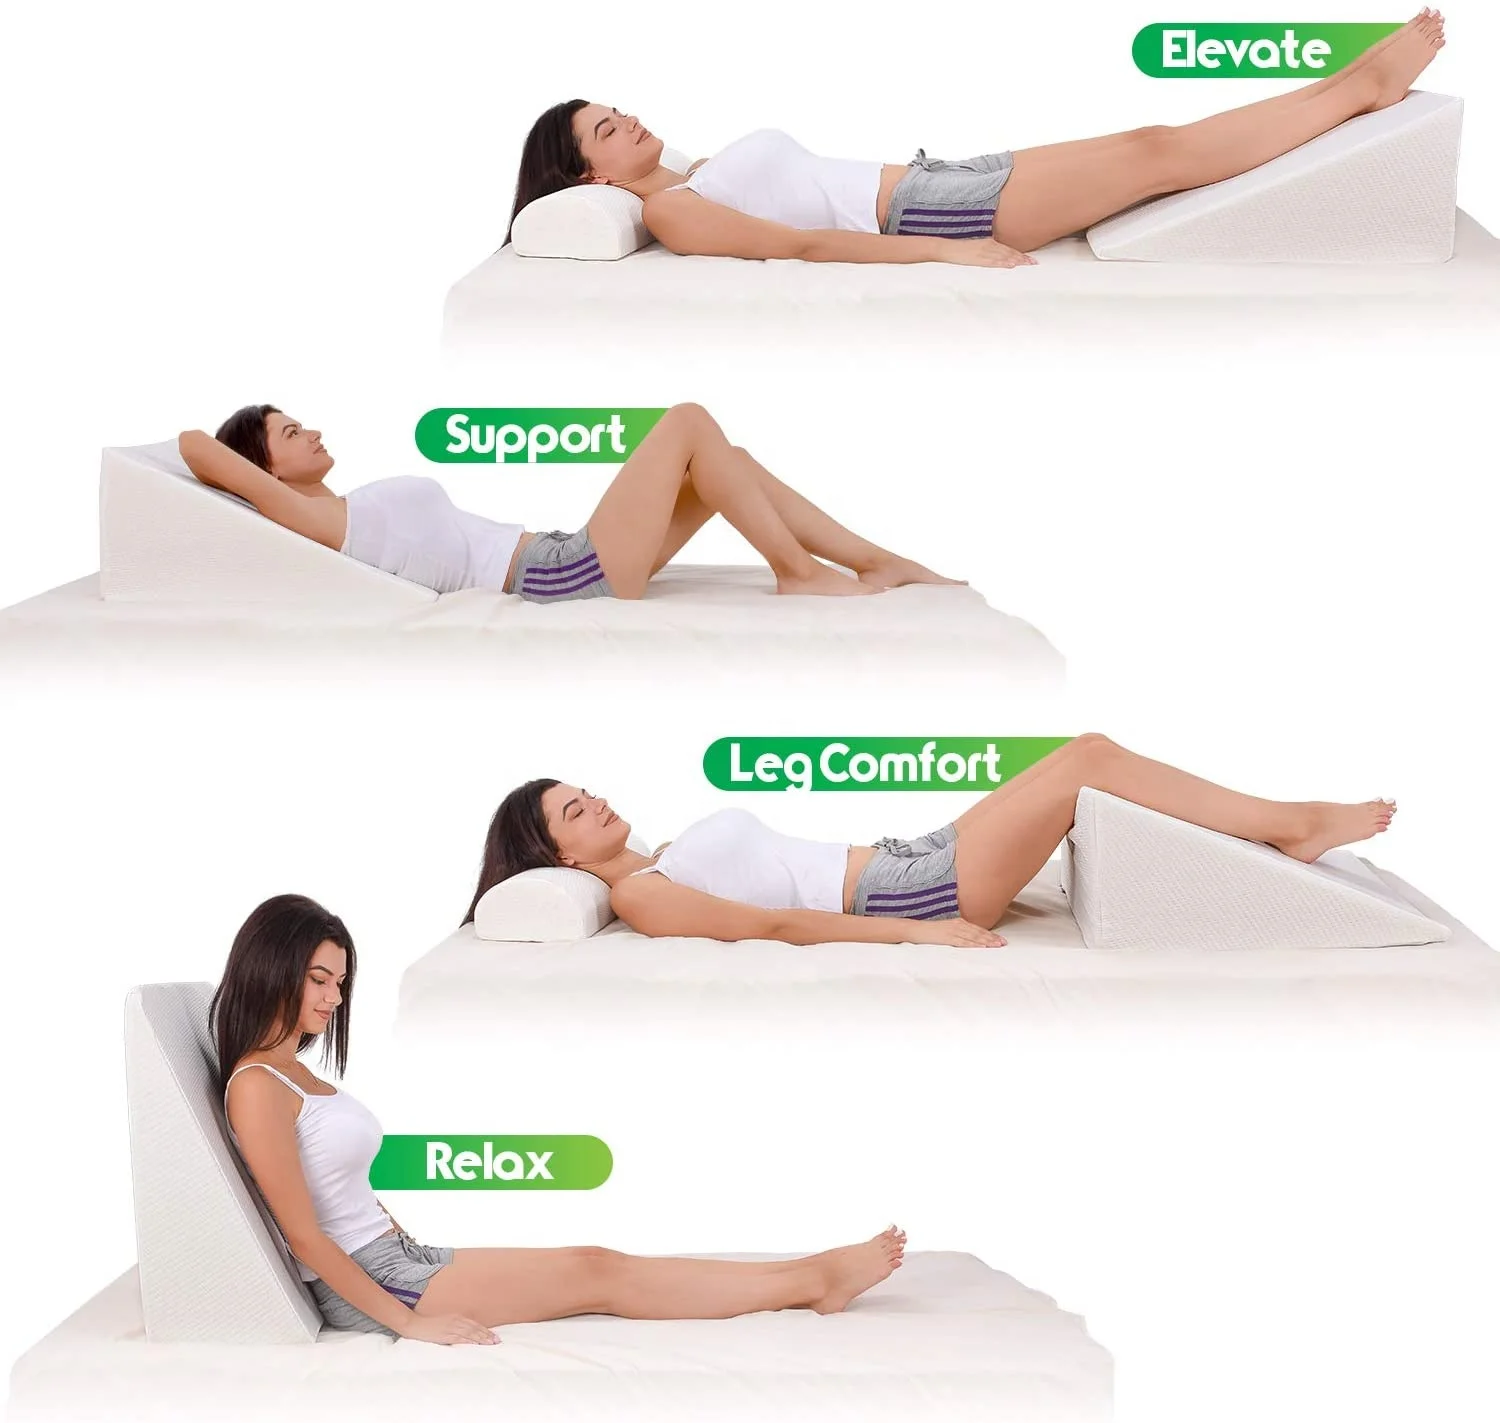 Details about   Pro Orthopedic Acid Reflux Foam Bed Wedge Pillows Back Leg Elevation Cushions 